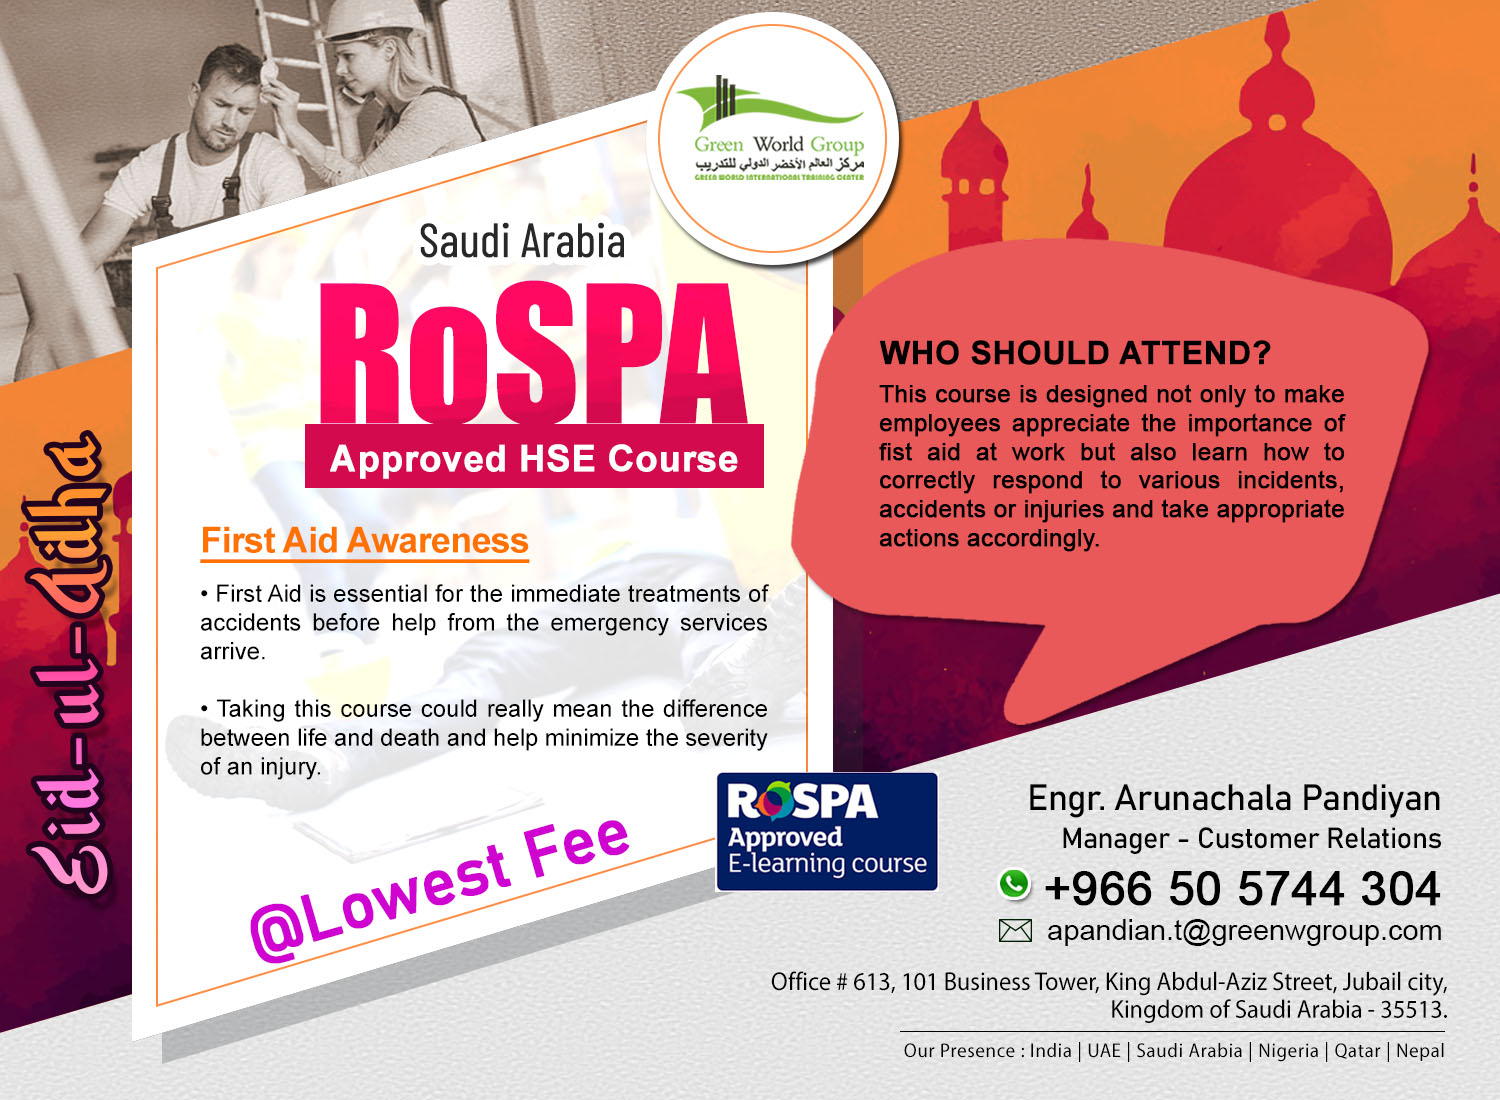 RoSPA Approved HSE Course